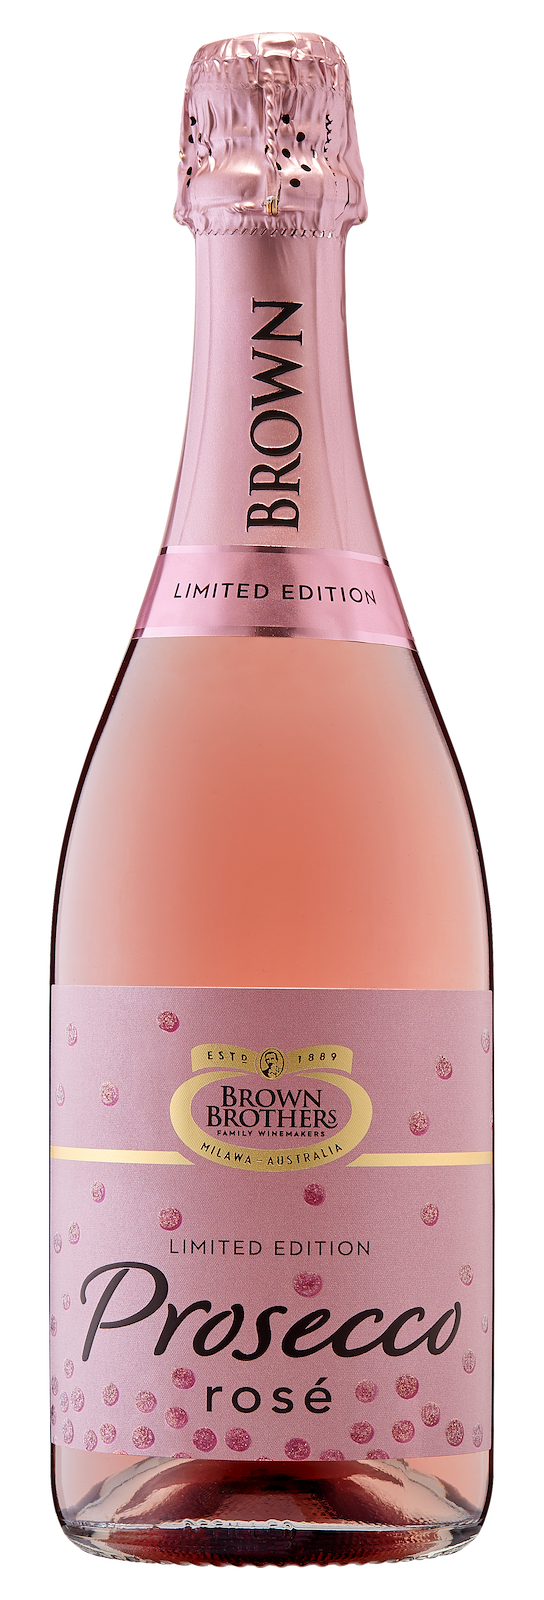 Limited Edition Prosecco Rose NV